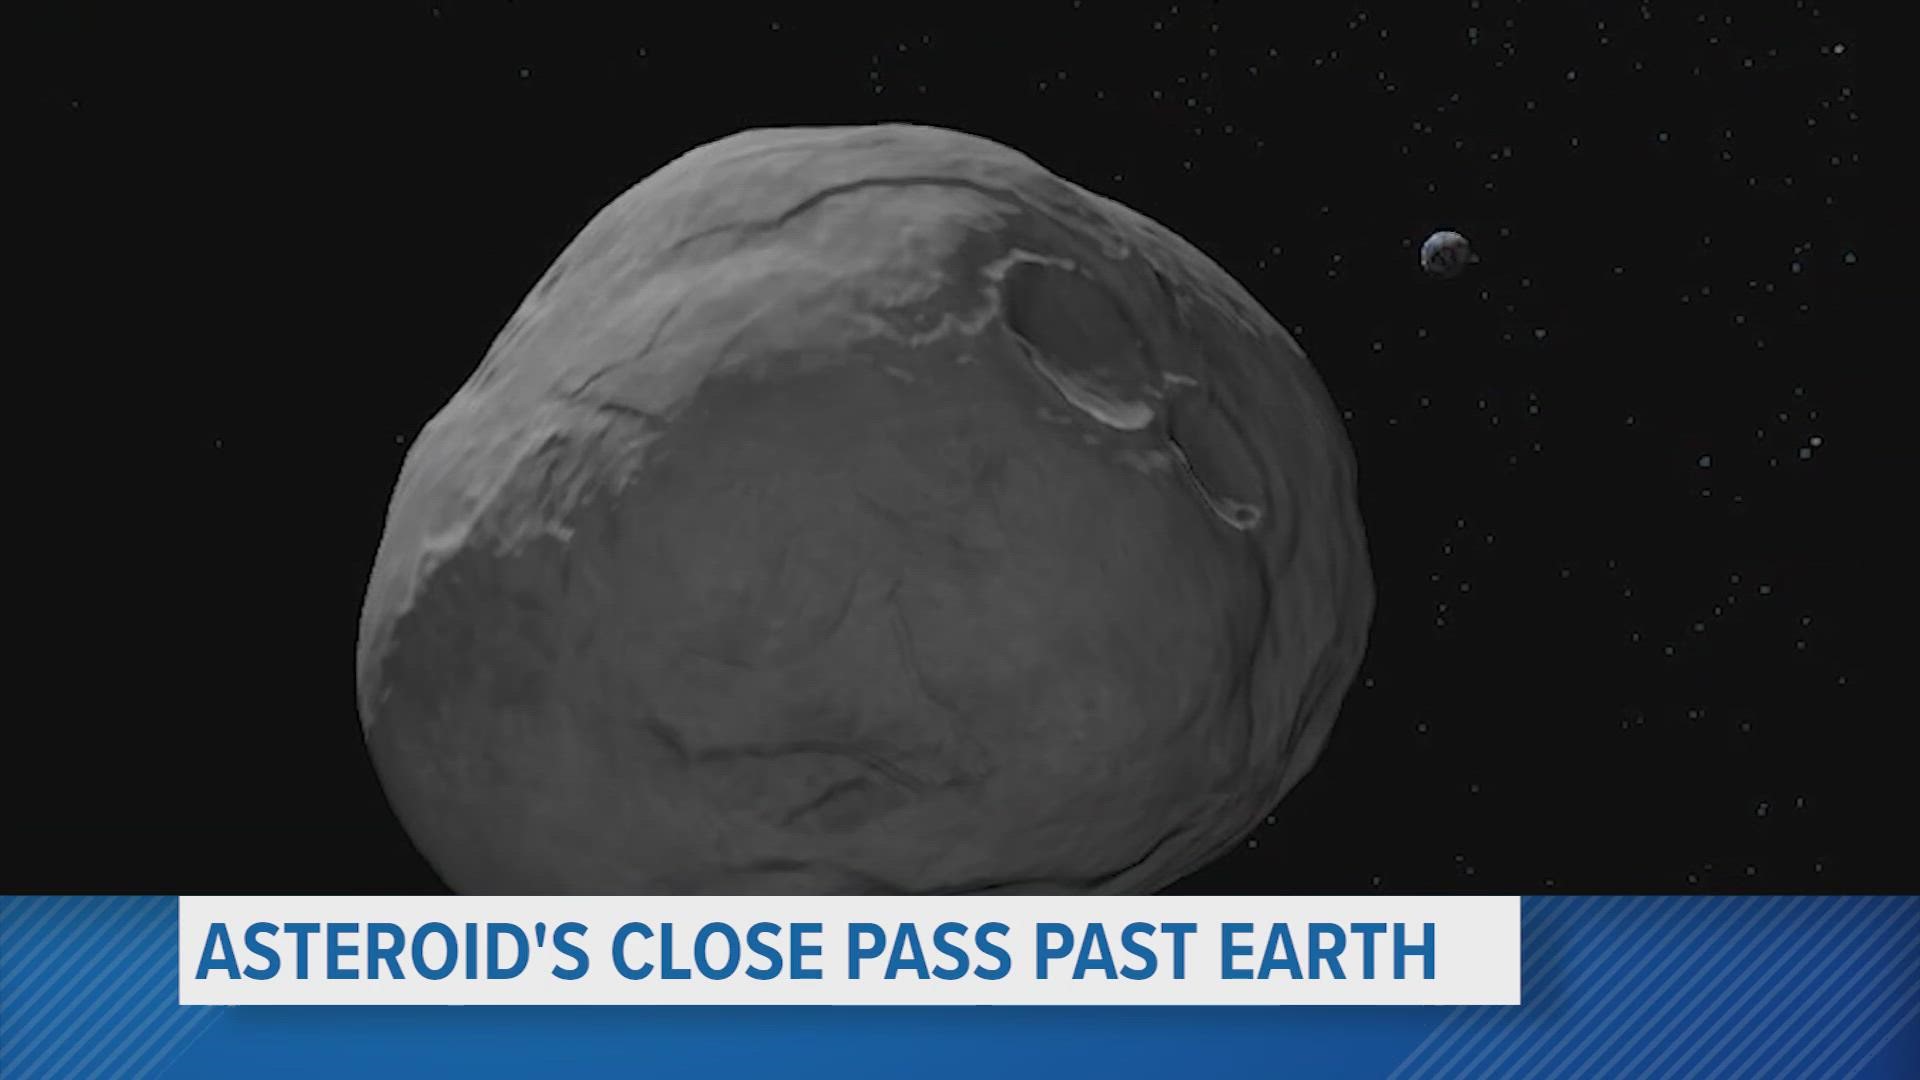 There was a close call wtih an asteroid Thursday night, as it came within 2,000 miles of Earth. But experts said it would be burned up on entry.